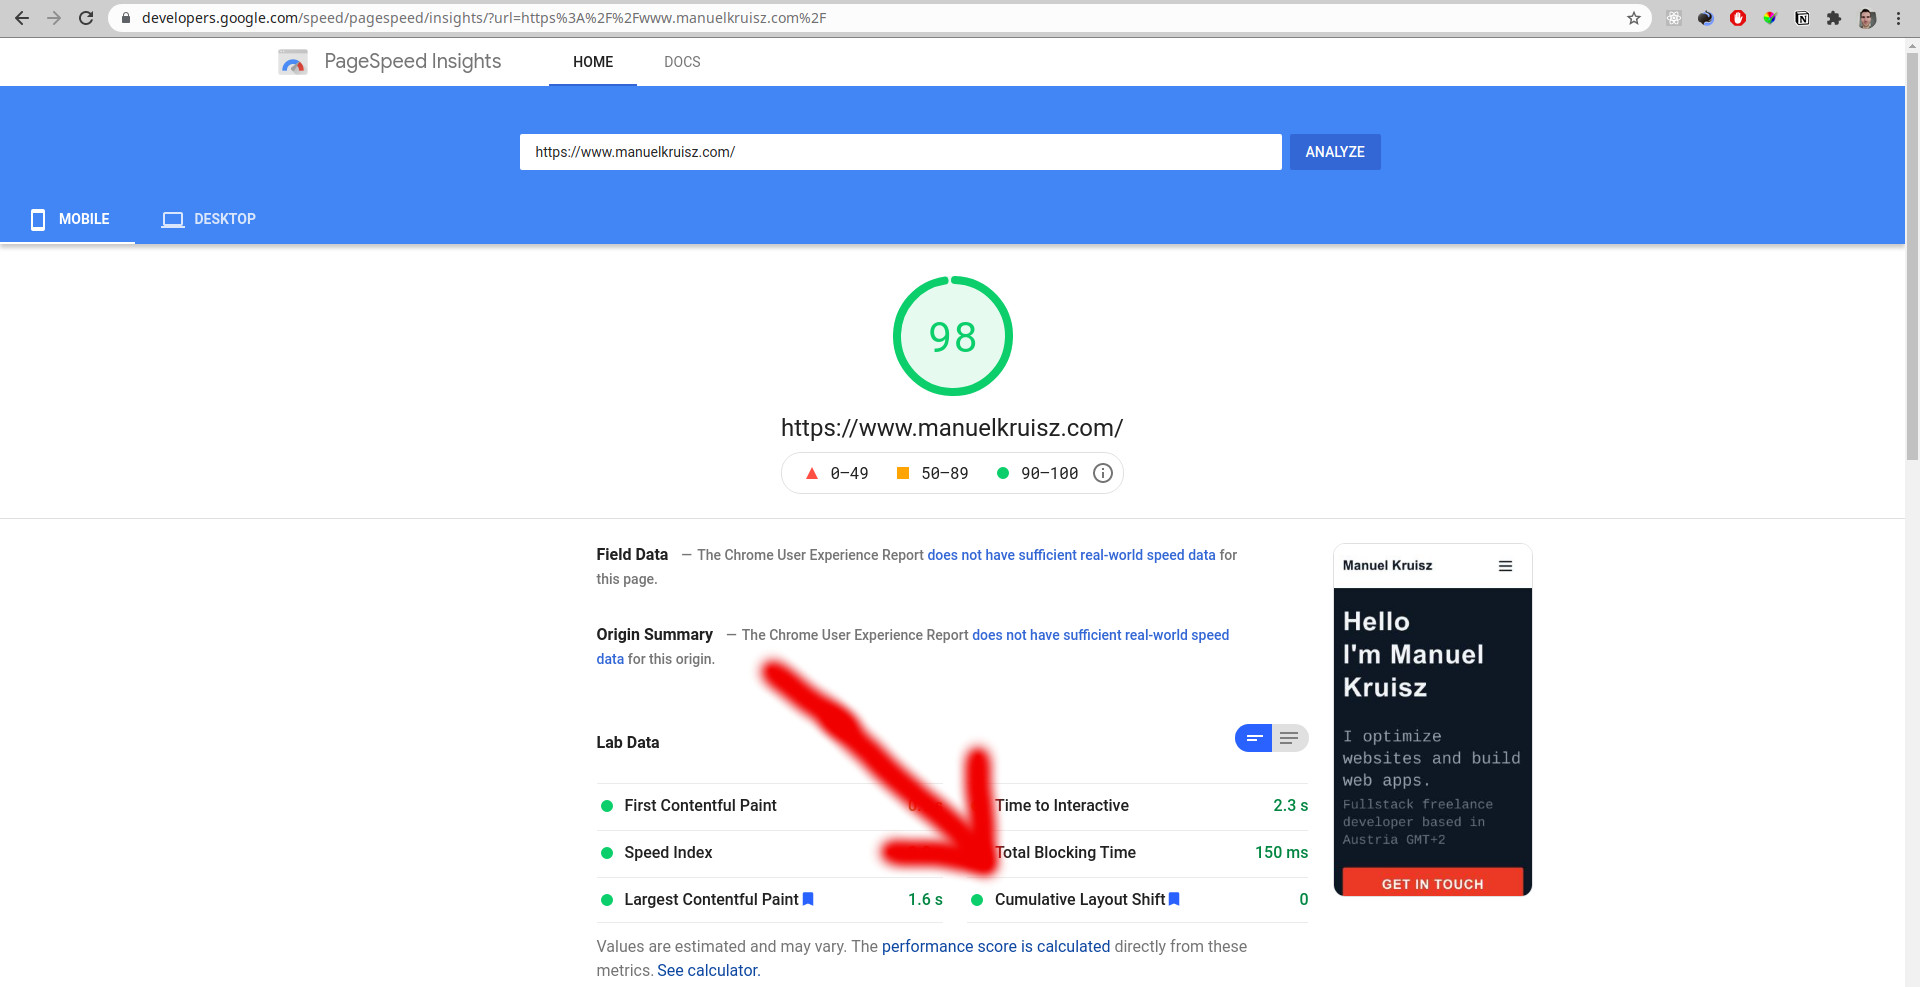 CLS metric is shown on https://developers.google.com/speed/pagespeed